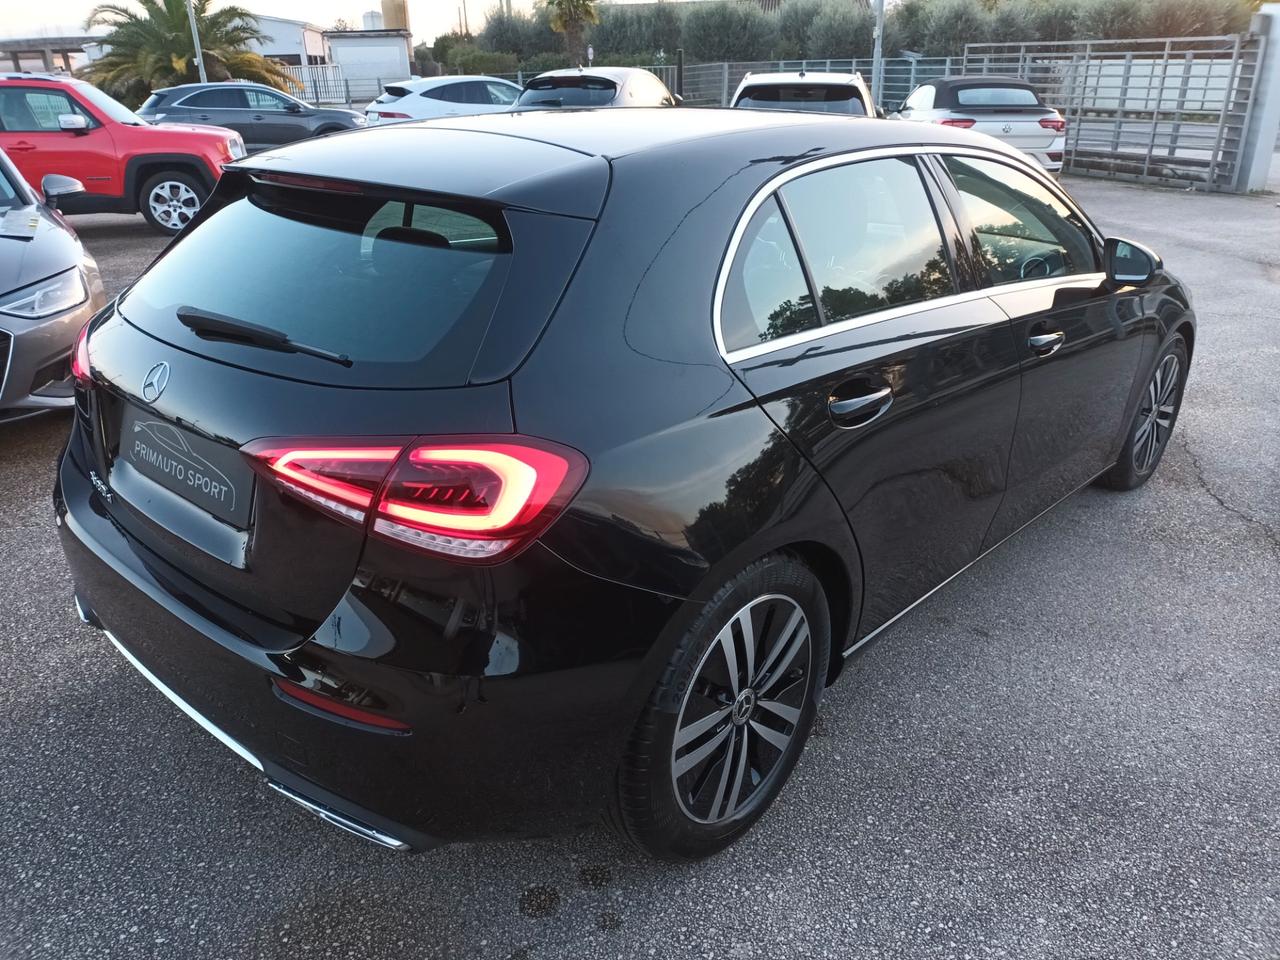 Mercedes-benz A 180 RESTYLING*SPORT*COME NUOVA*